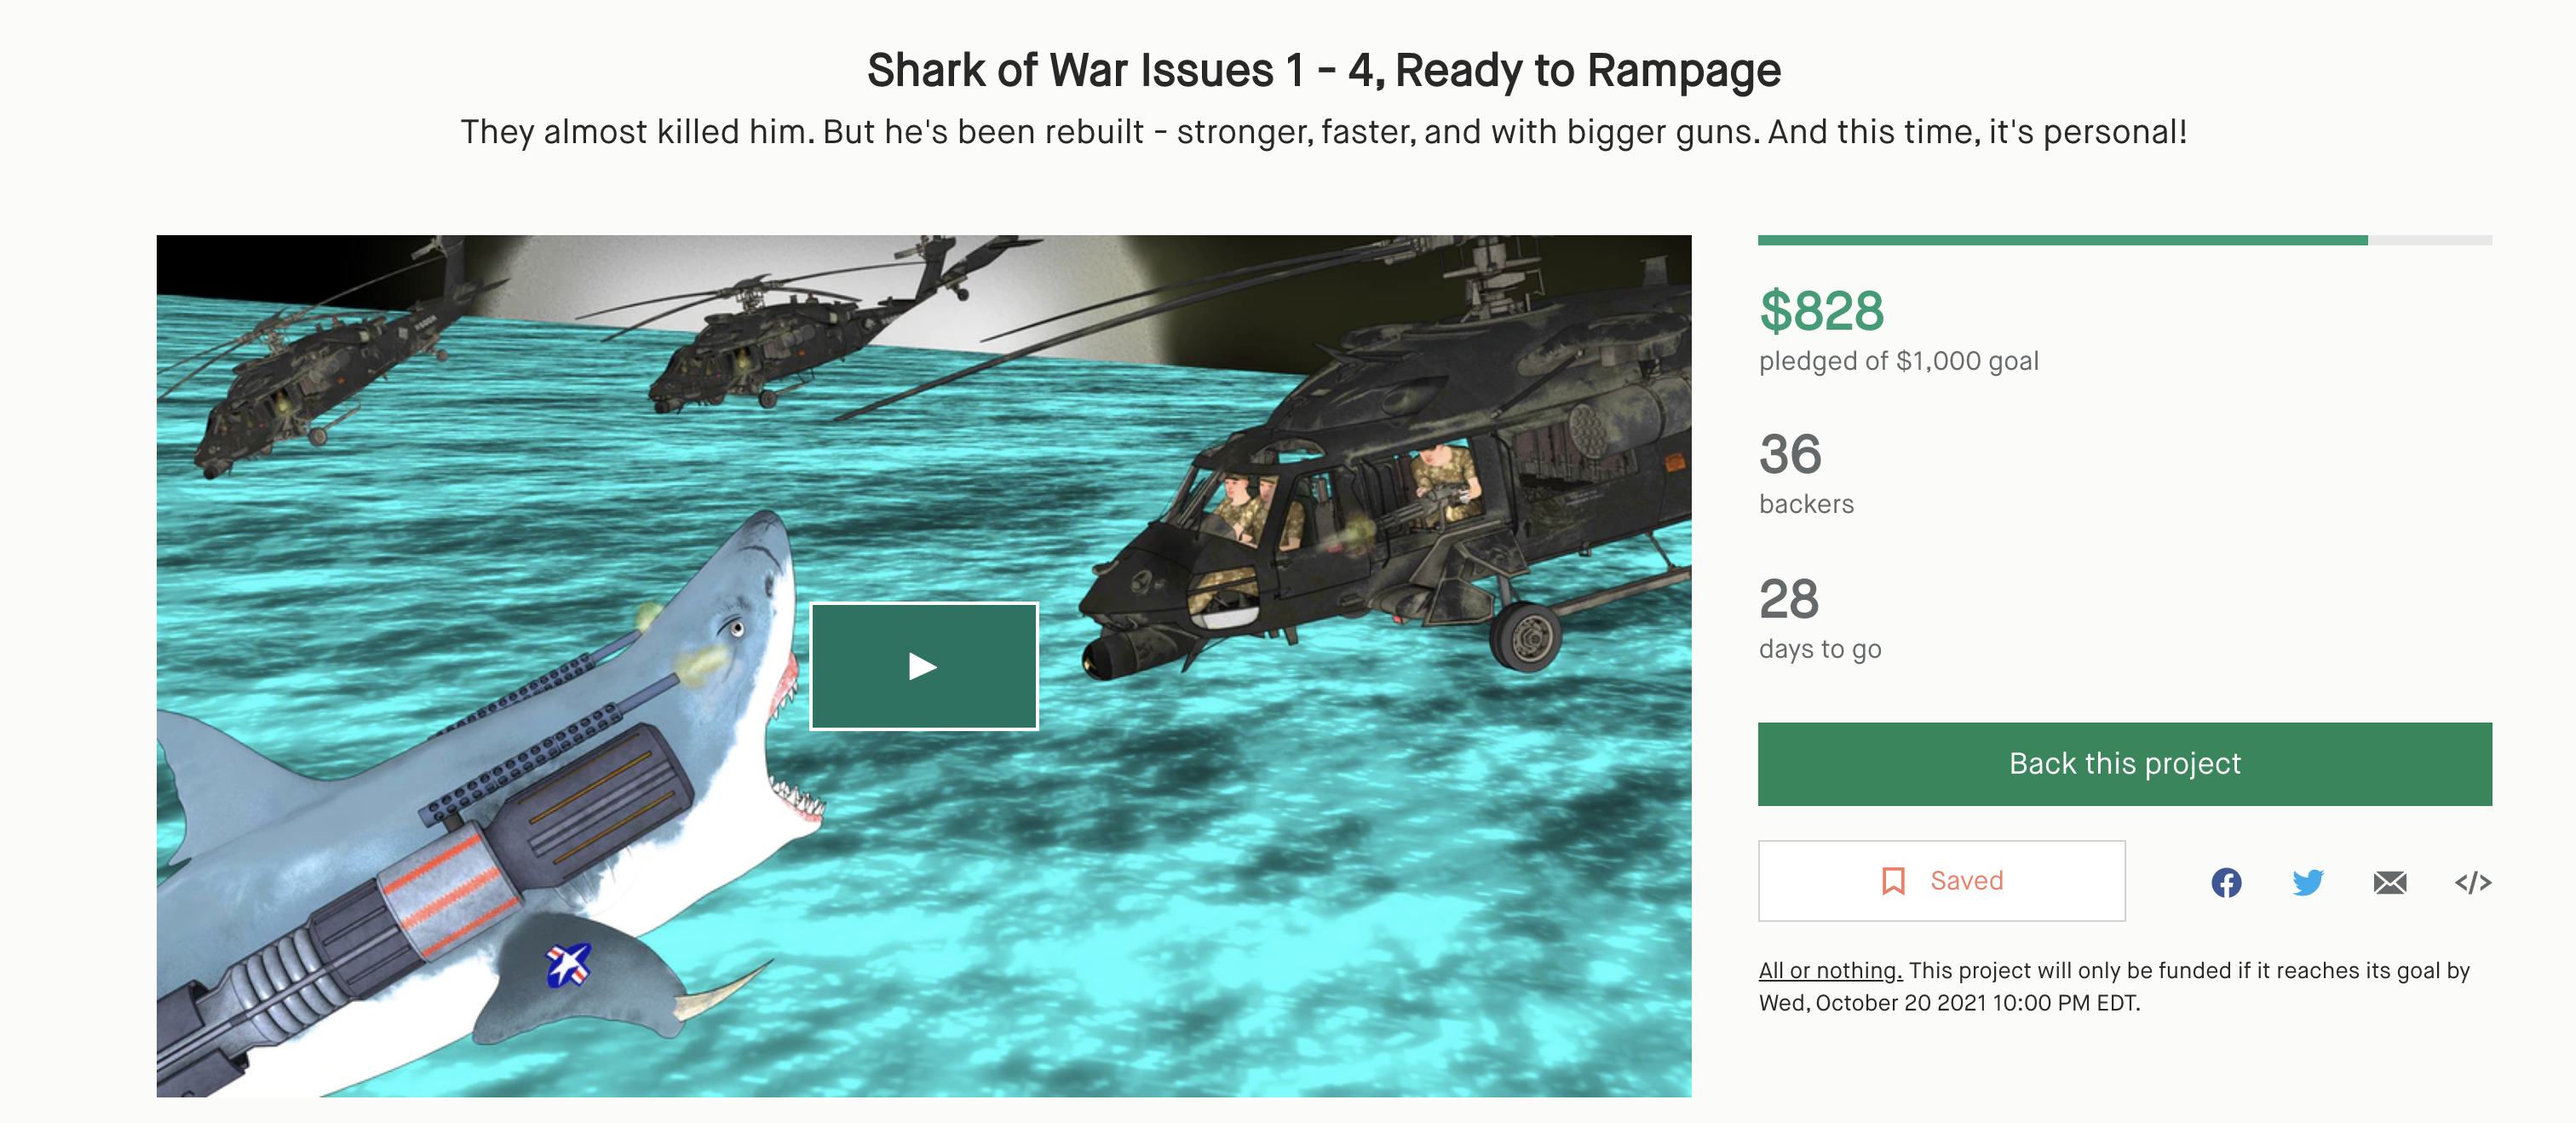 It’s Jaws Meets Robocop! on BACKER PAUSE